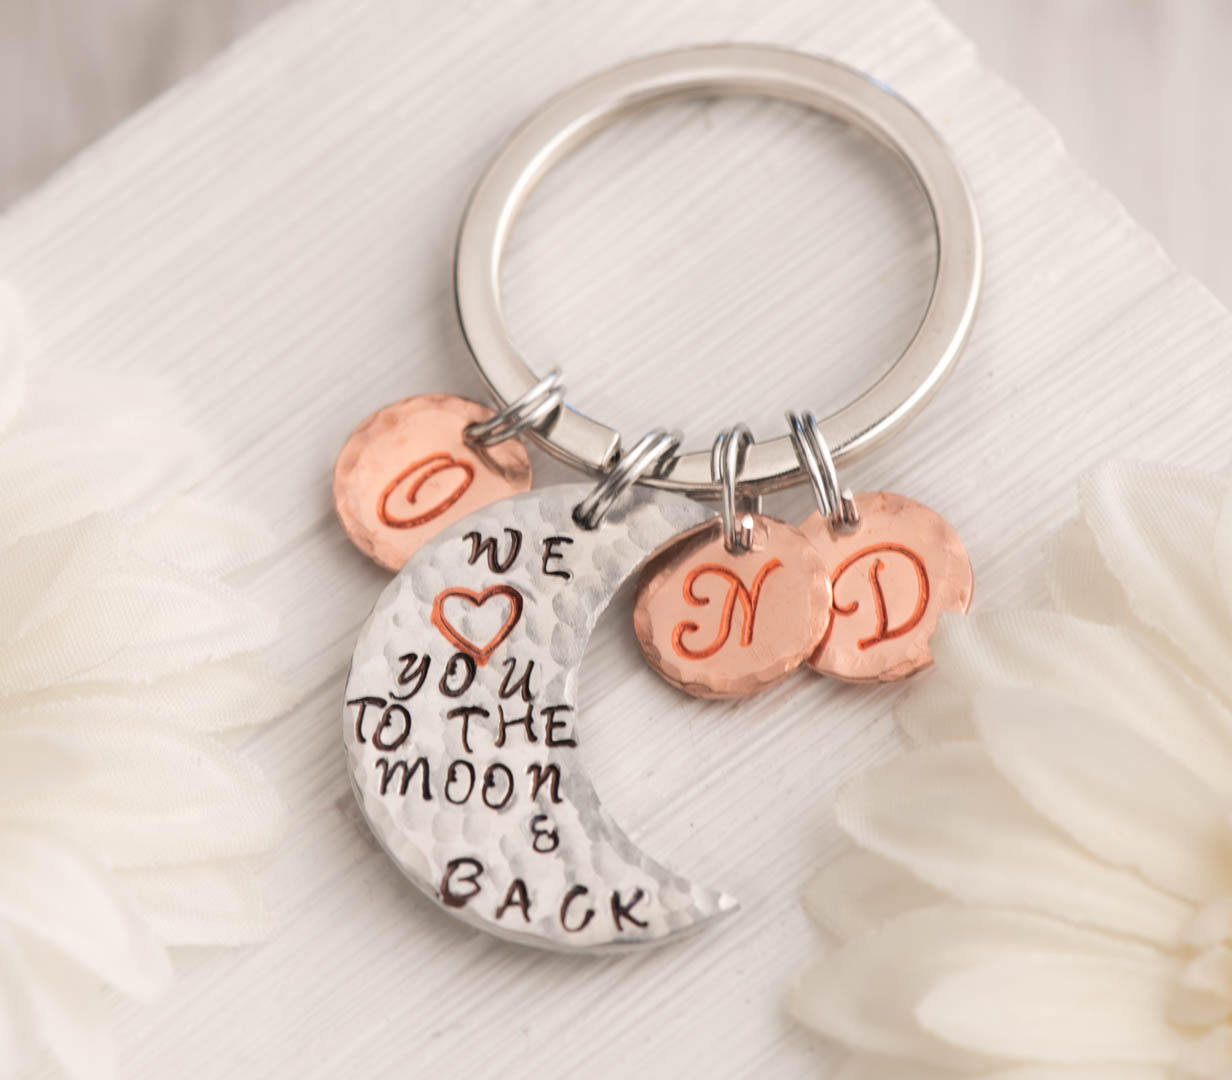 Hand Stamped Keychain, Mothers Day Keychain, Silver Moon Keychain, Gift For Mom From 3 Daughters, To The Moon And Back, Mom Of 3 Kids, We Love